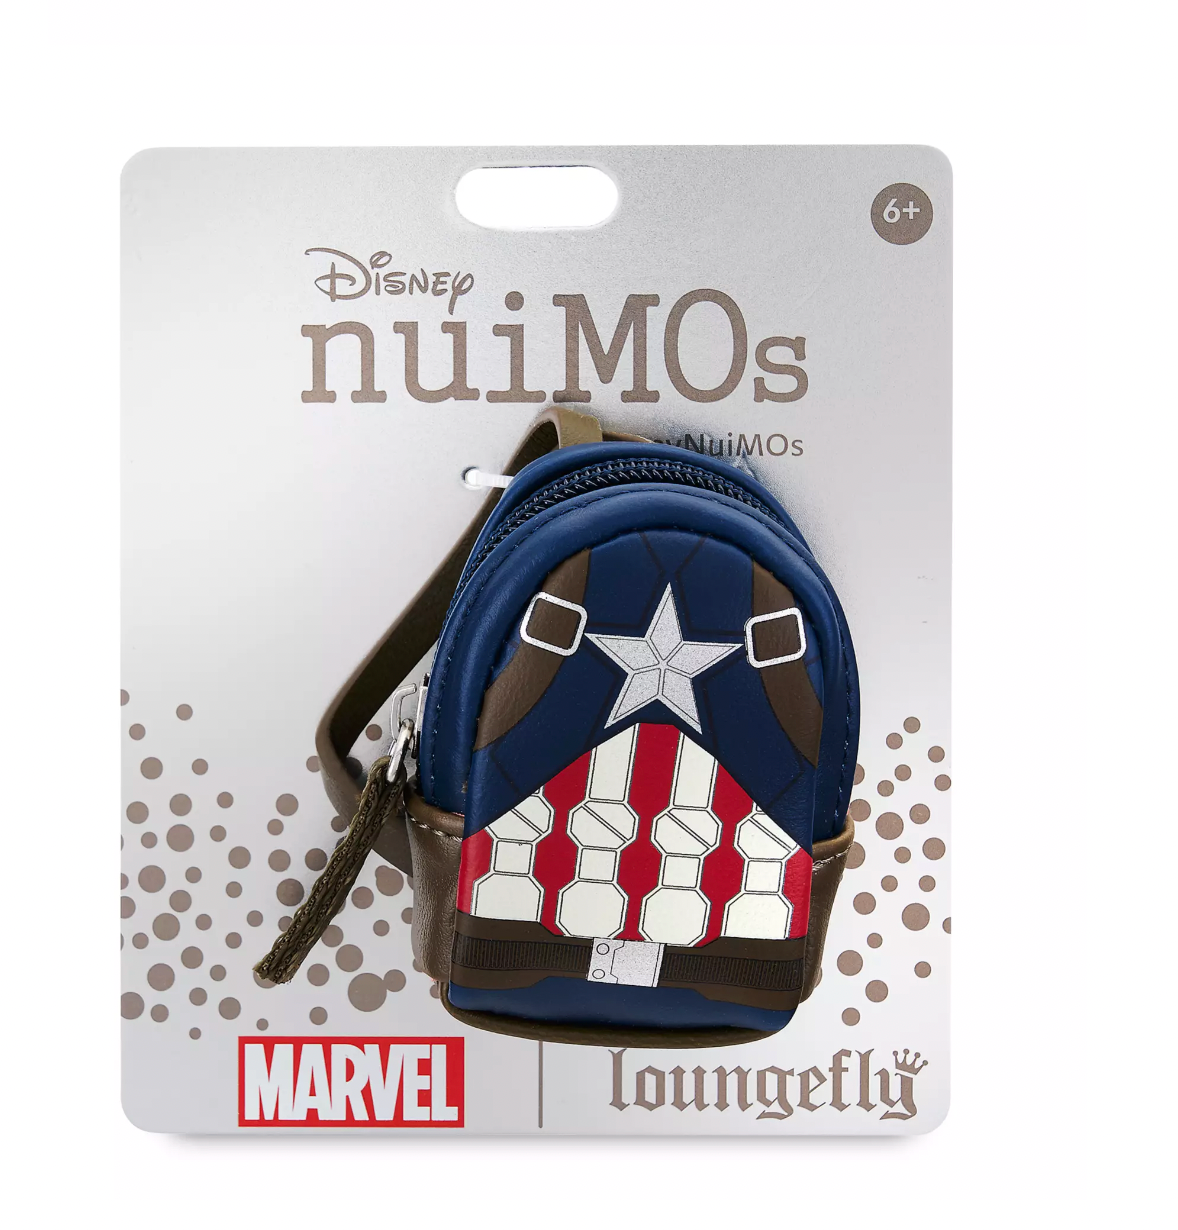 Disney NuiMOs Accessory Marvel Captain America Backpack by Loungefly New w Card